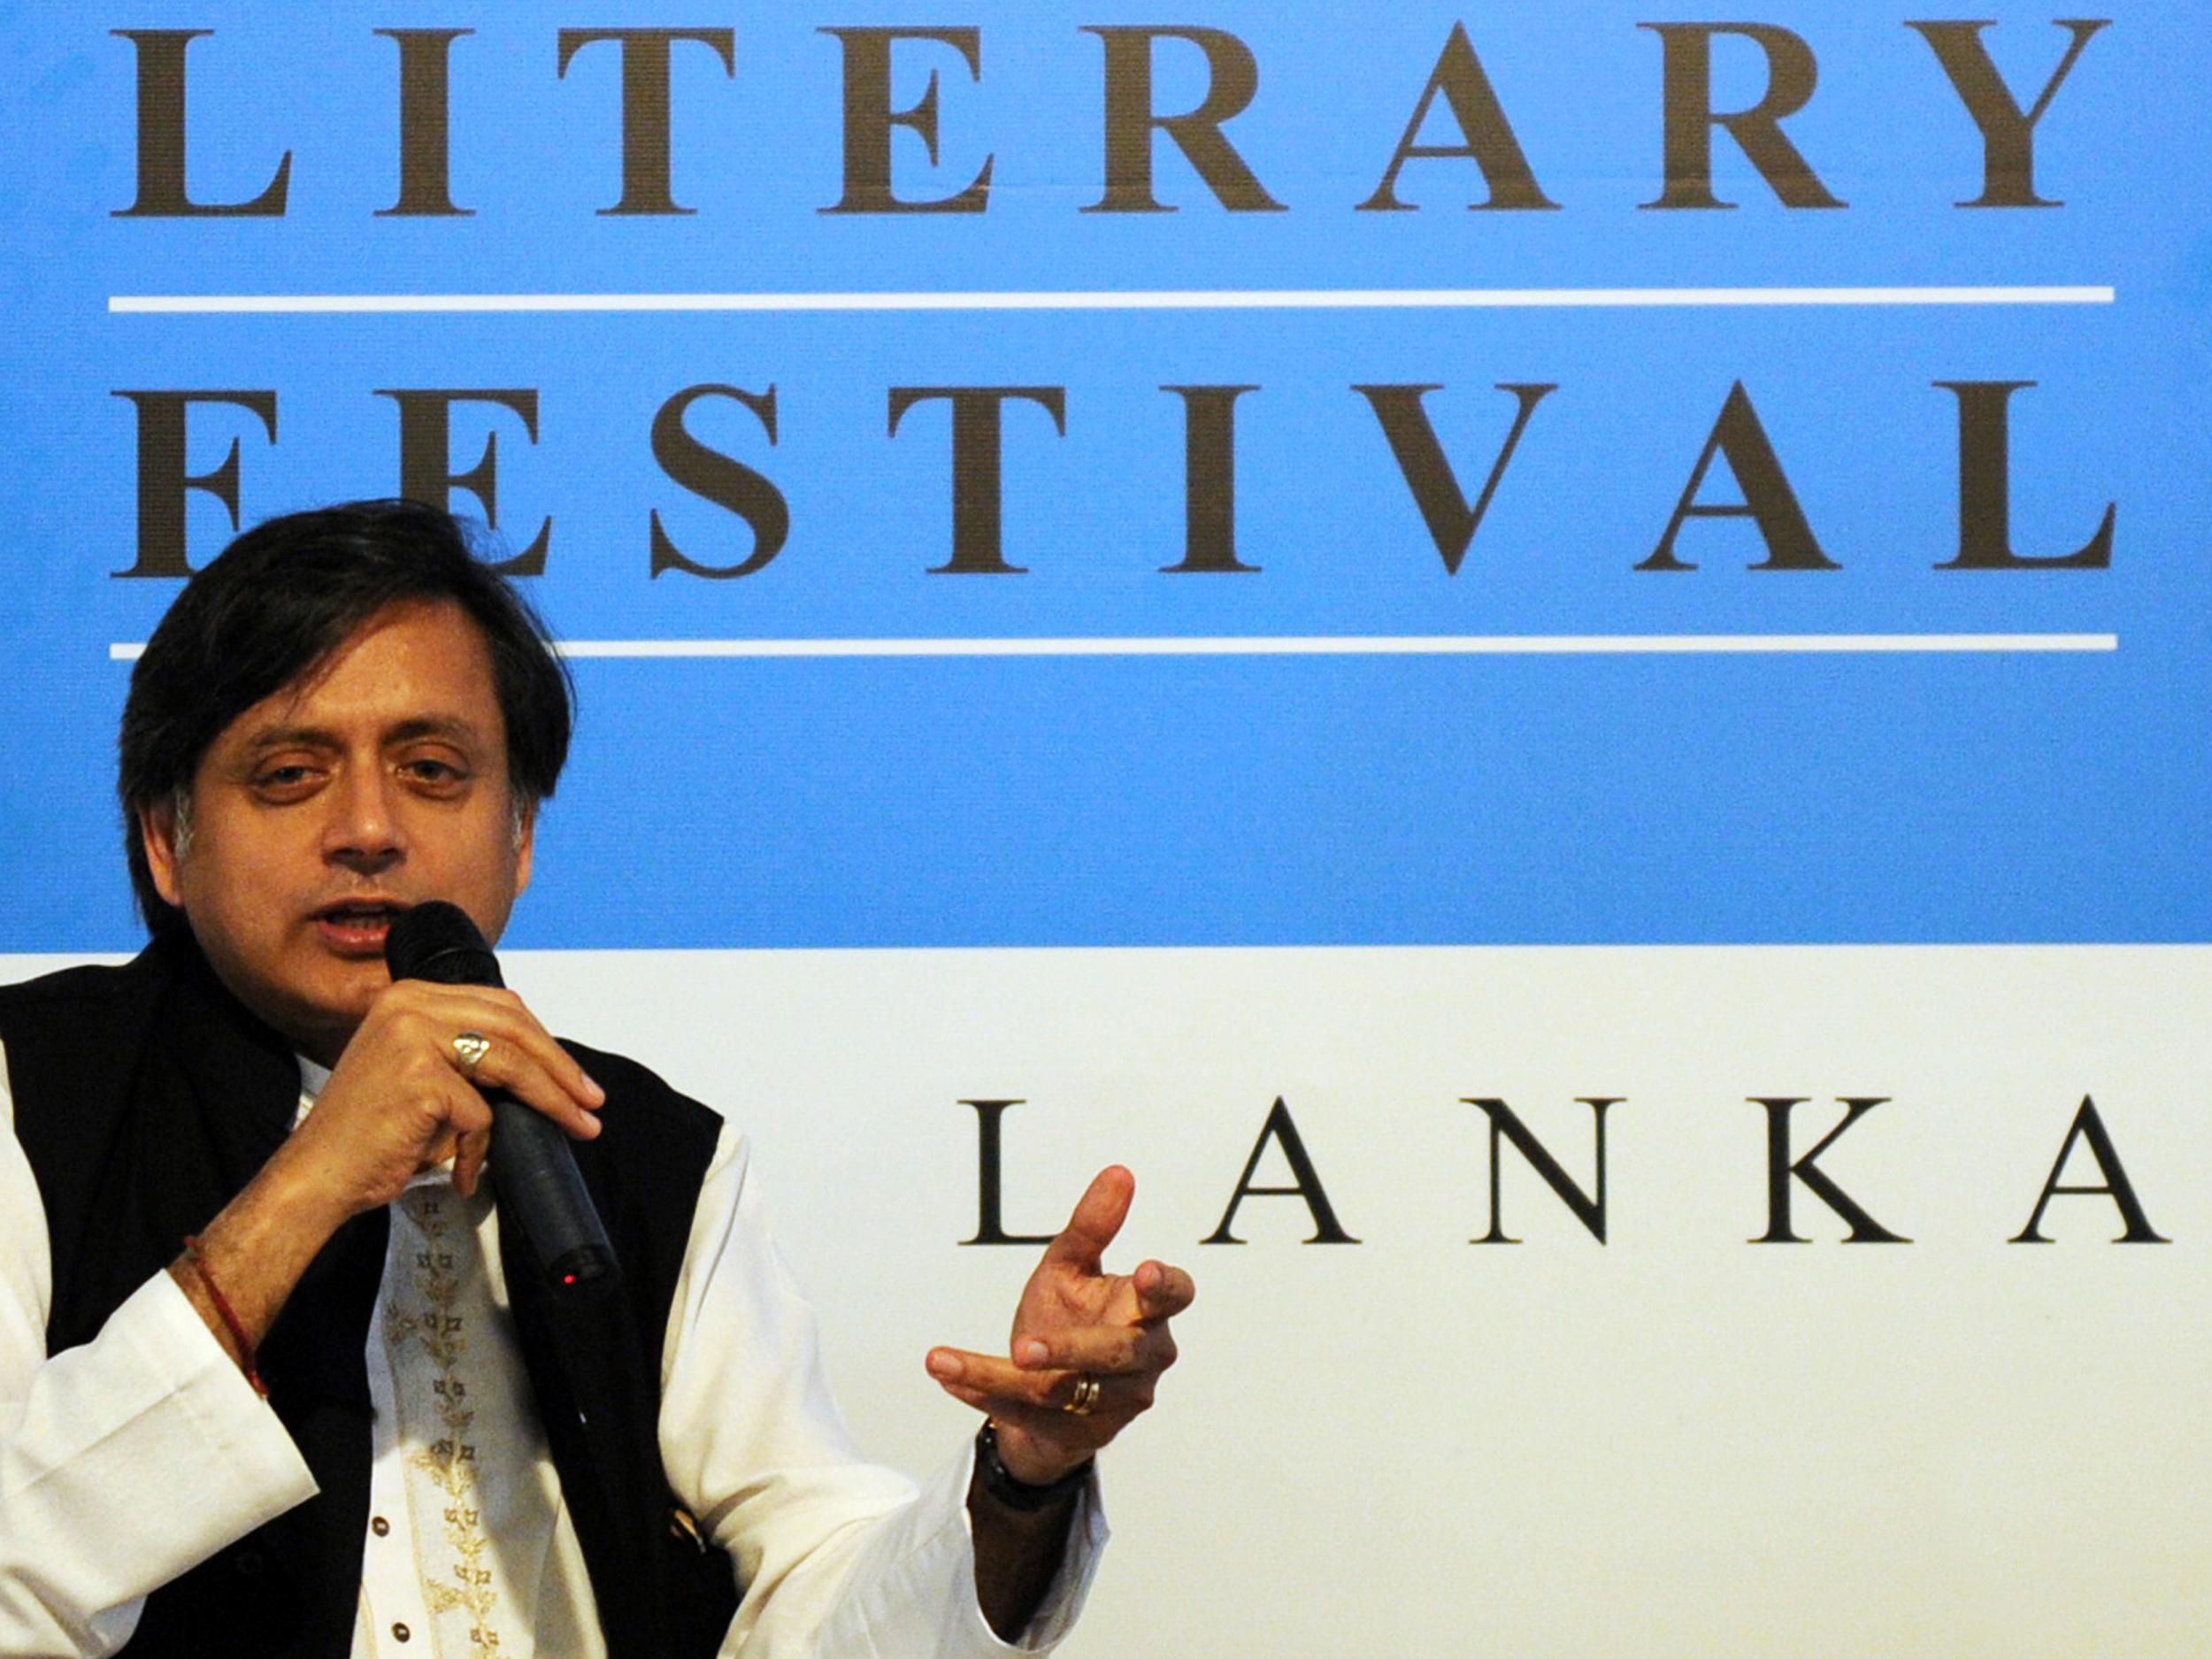 Indian ruling parliamentarian Sashi Tharoor talks to the co-founder of Sri Lanka's leading citizen journalism website Groundviews